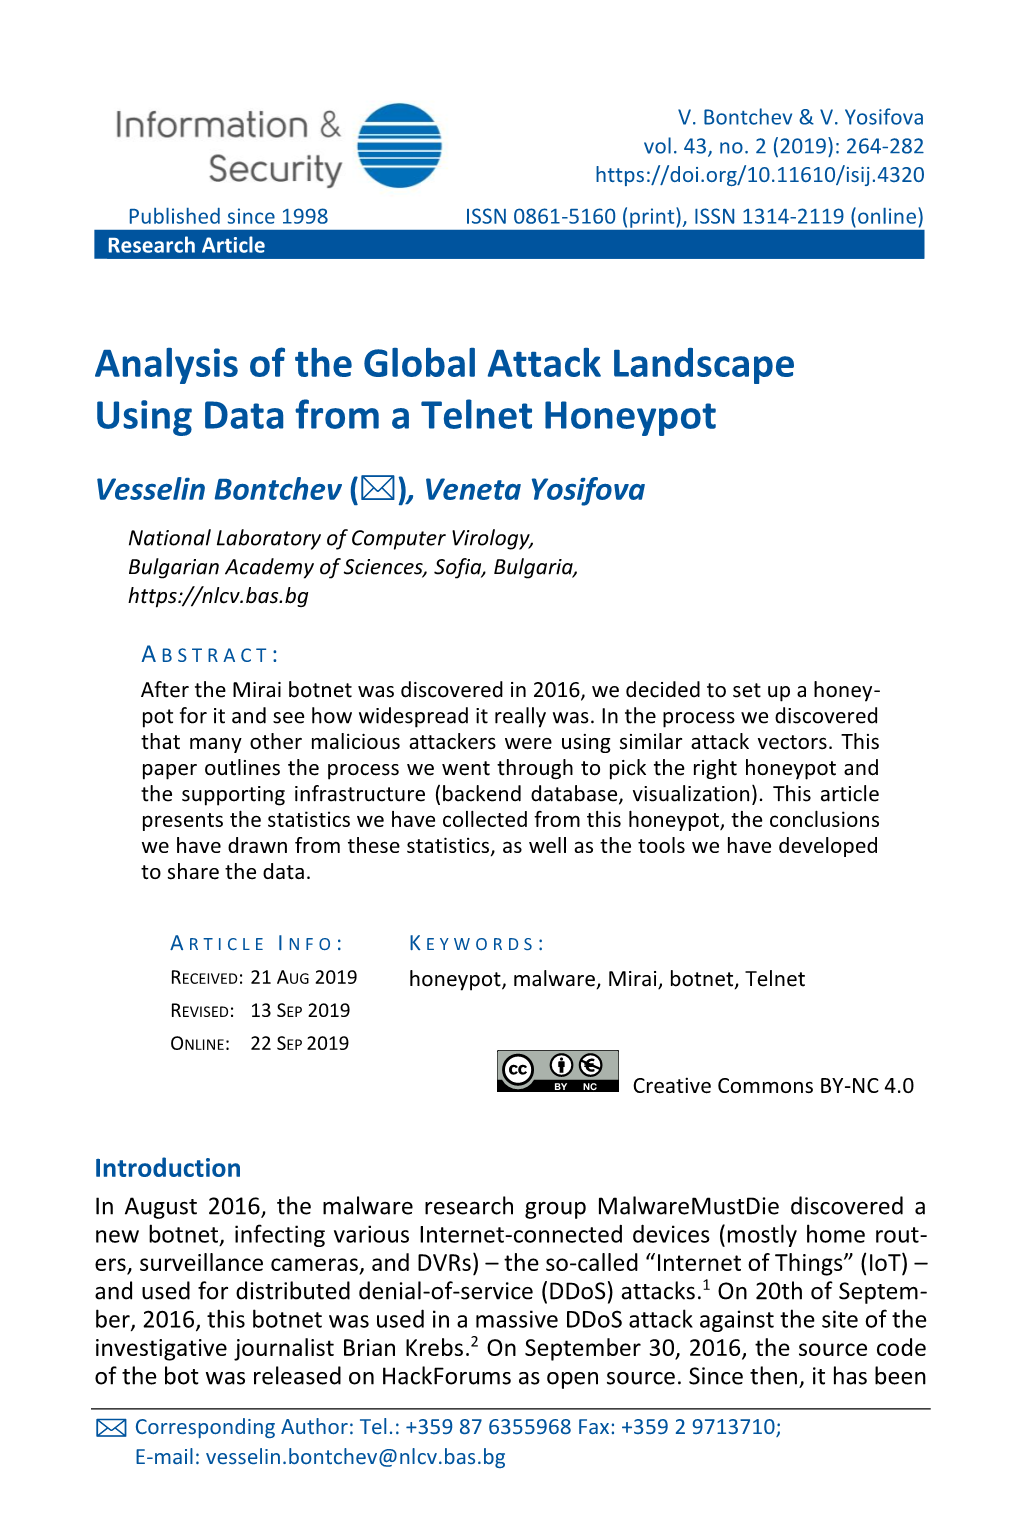 Analysis of the Global Attack Landscape Using Data from a Telnet Honeypot